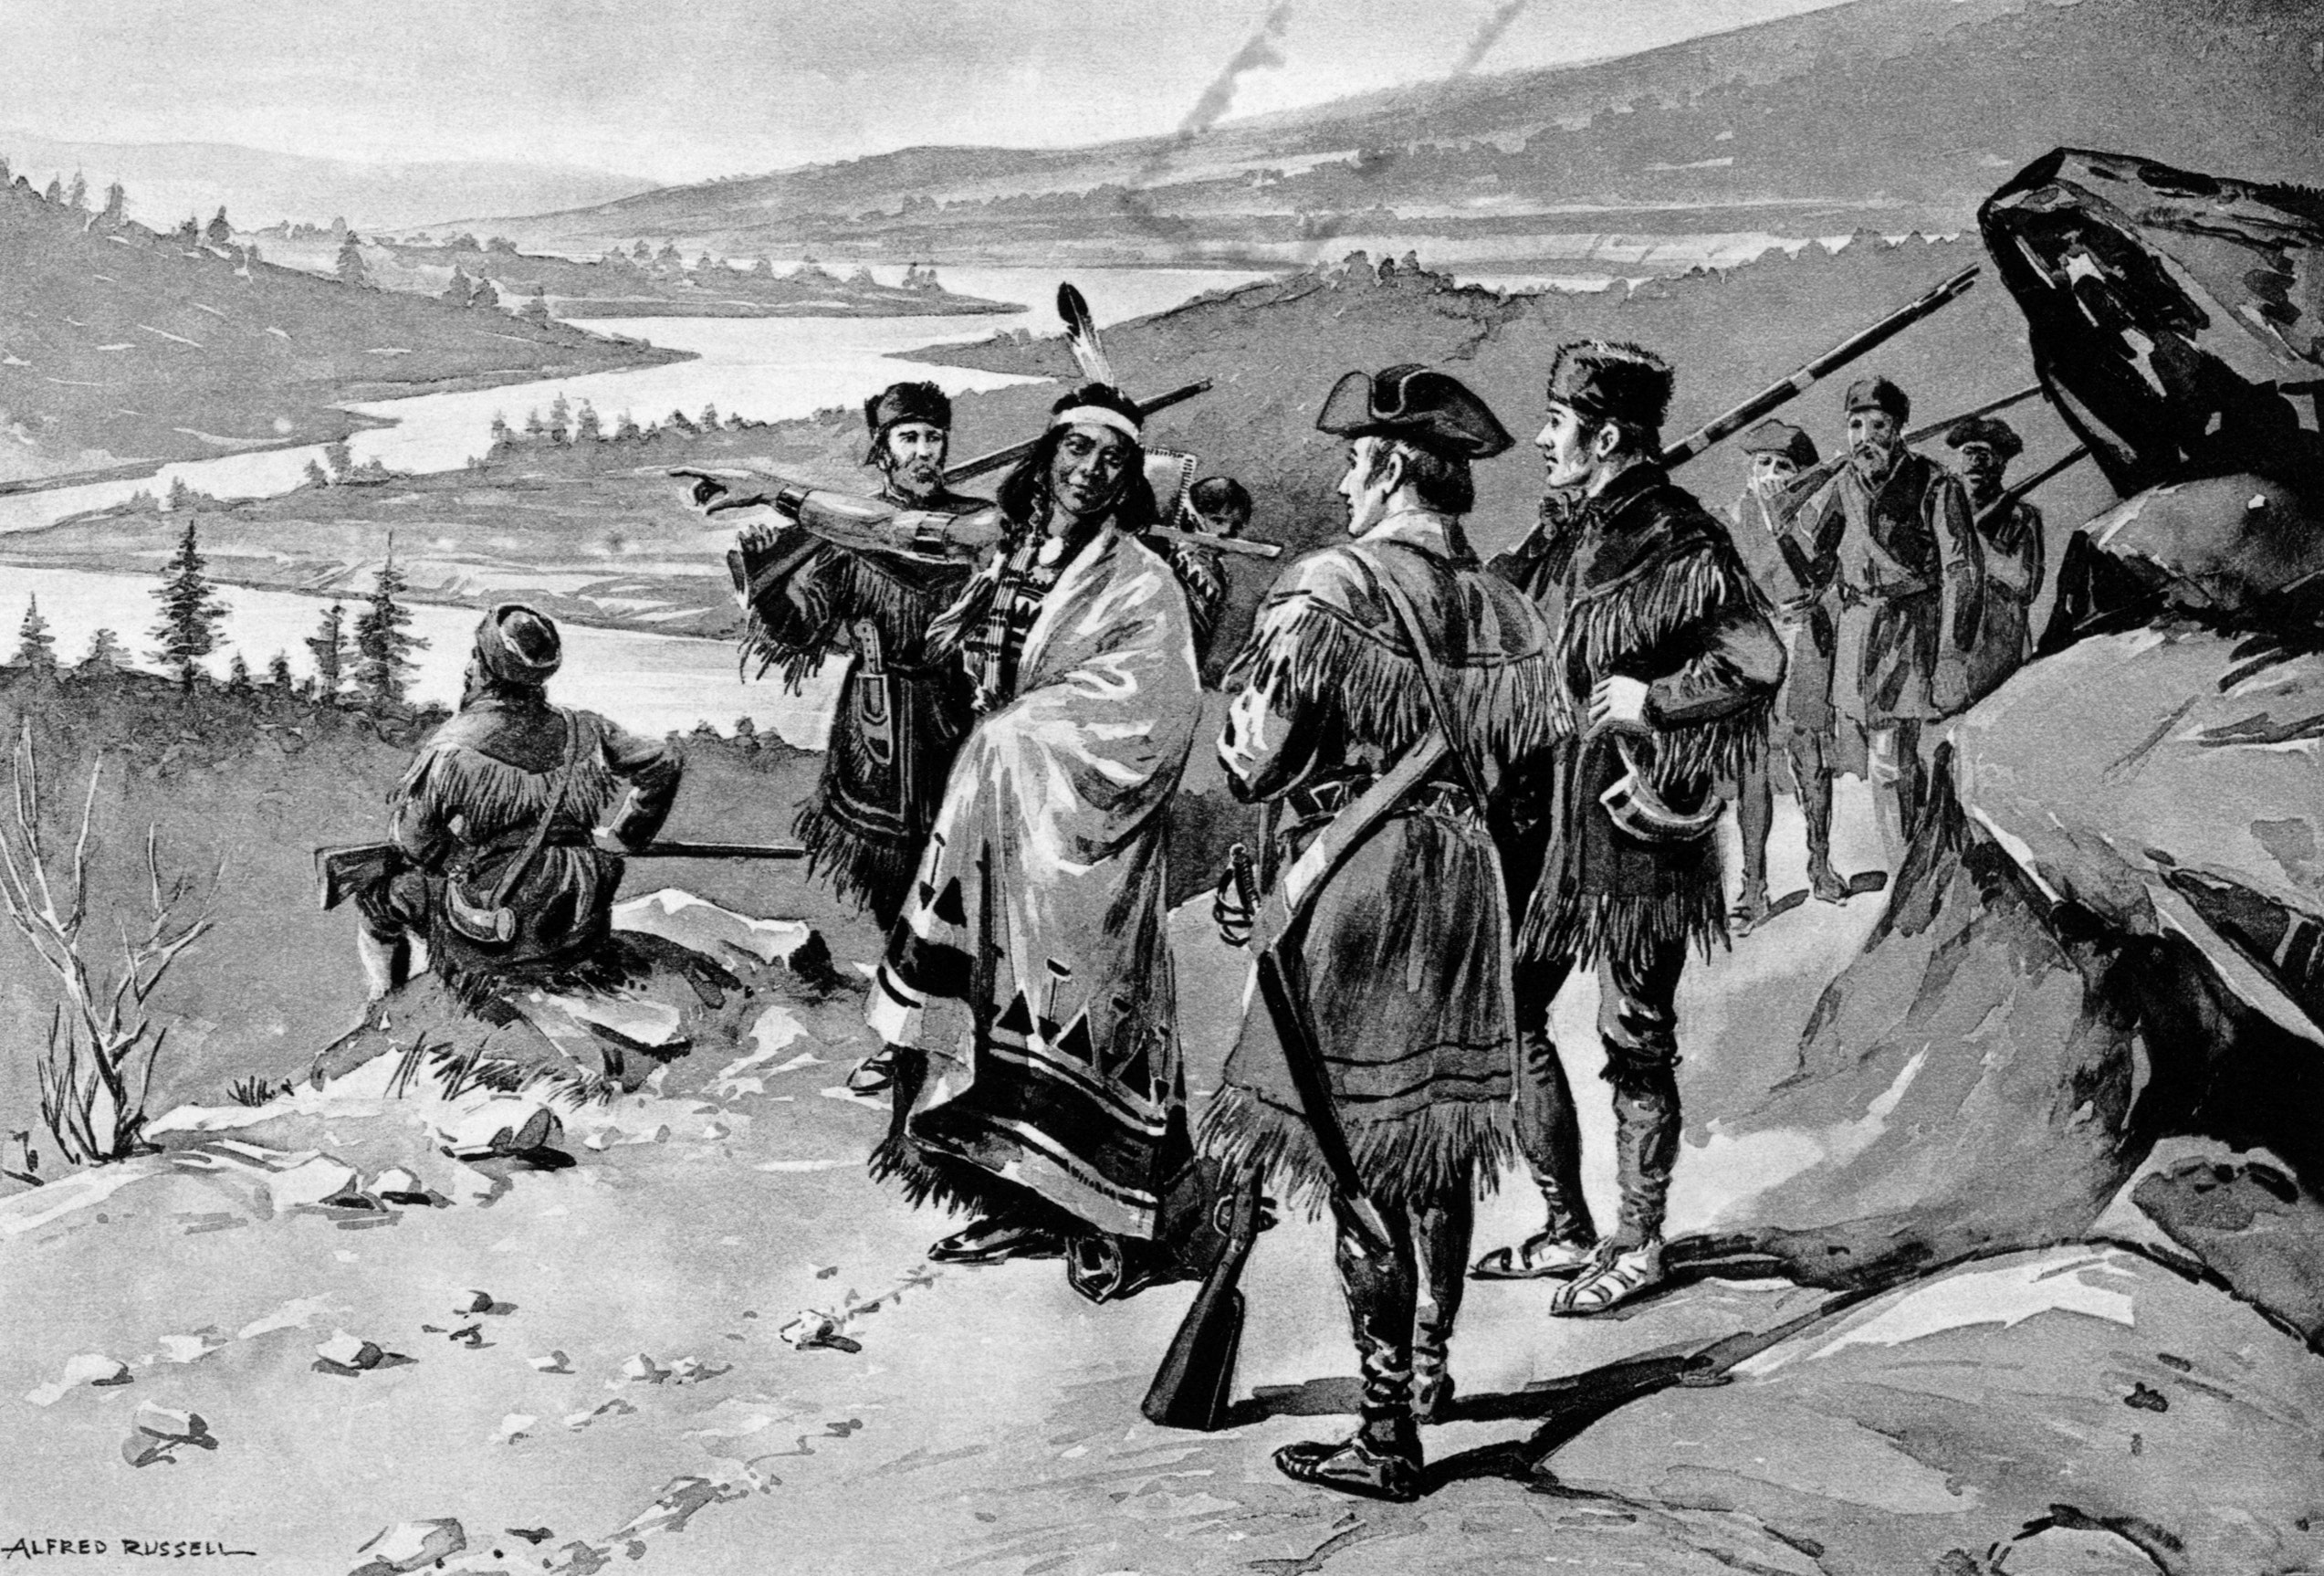 March 16, 1806 - Discover Lewis & Clark